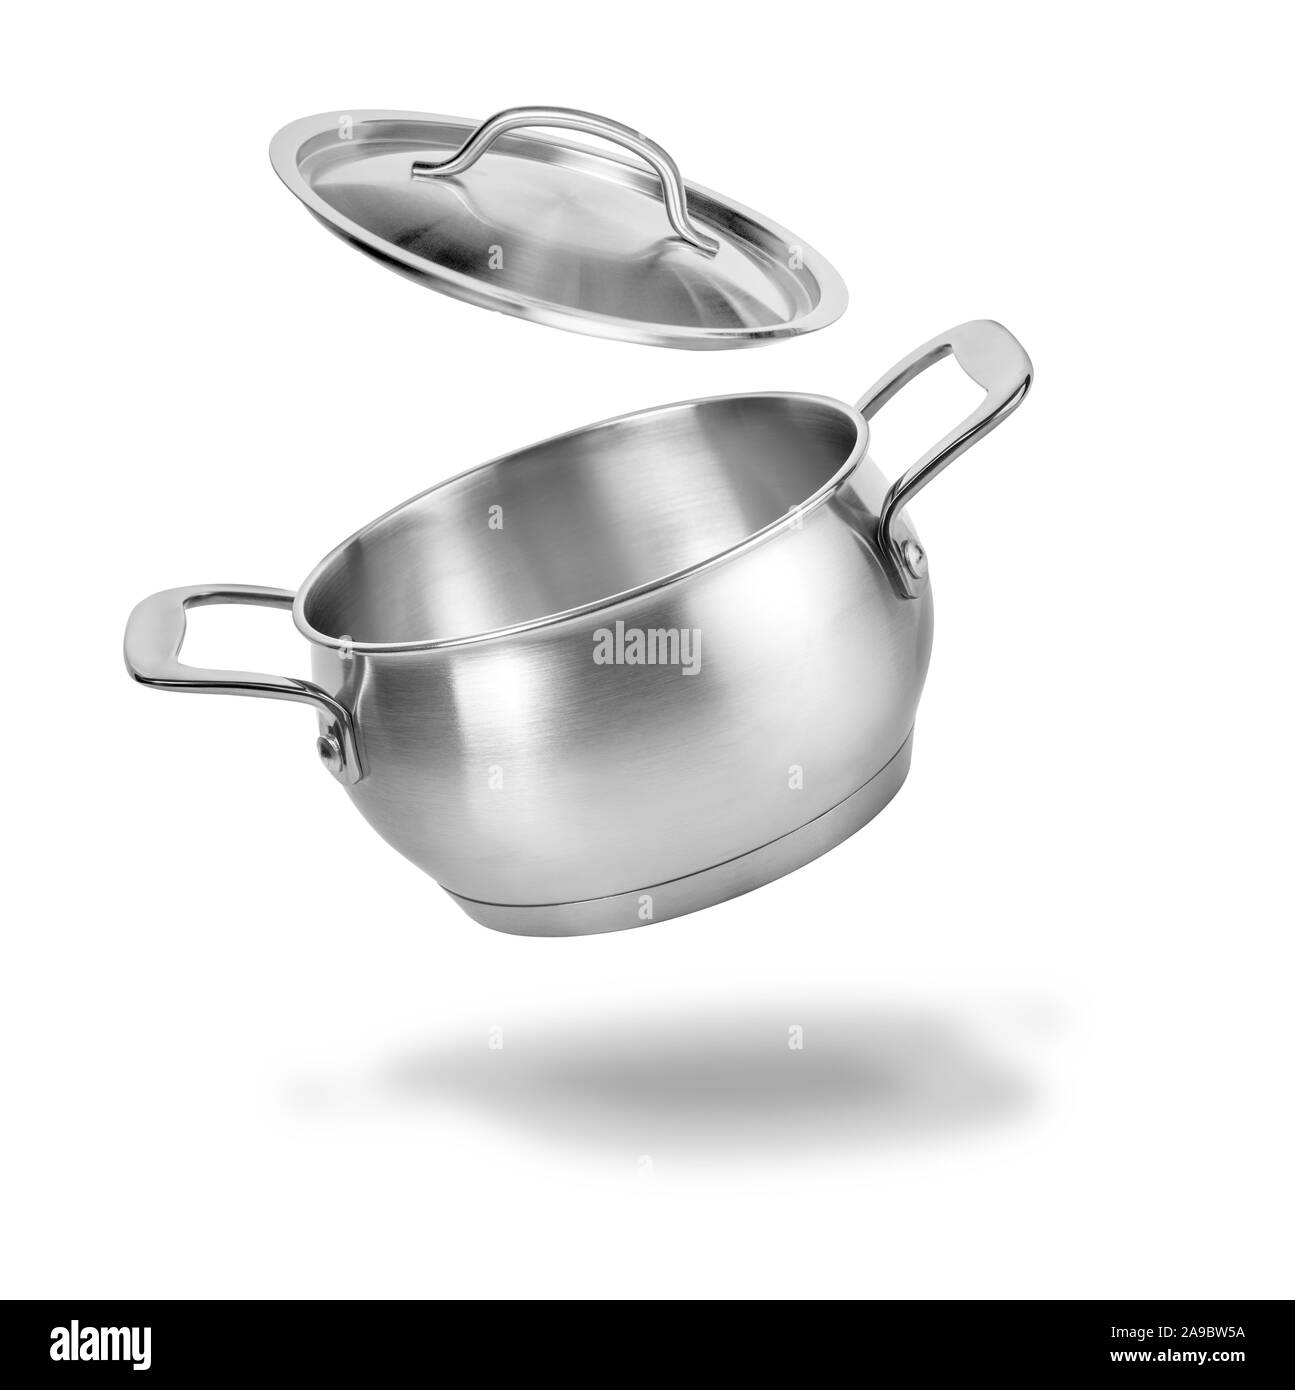 Stainless steel cooking pot isolated over white background Stock Photo